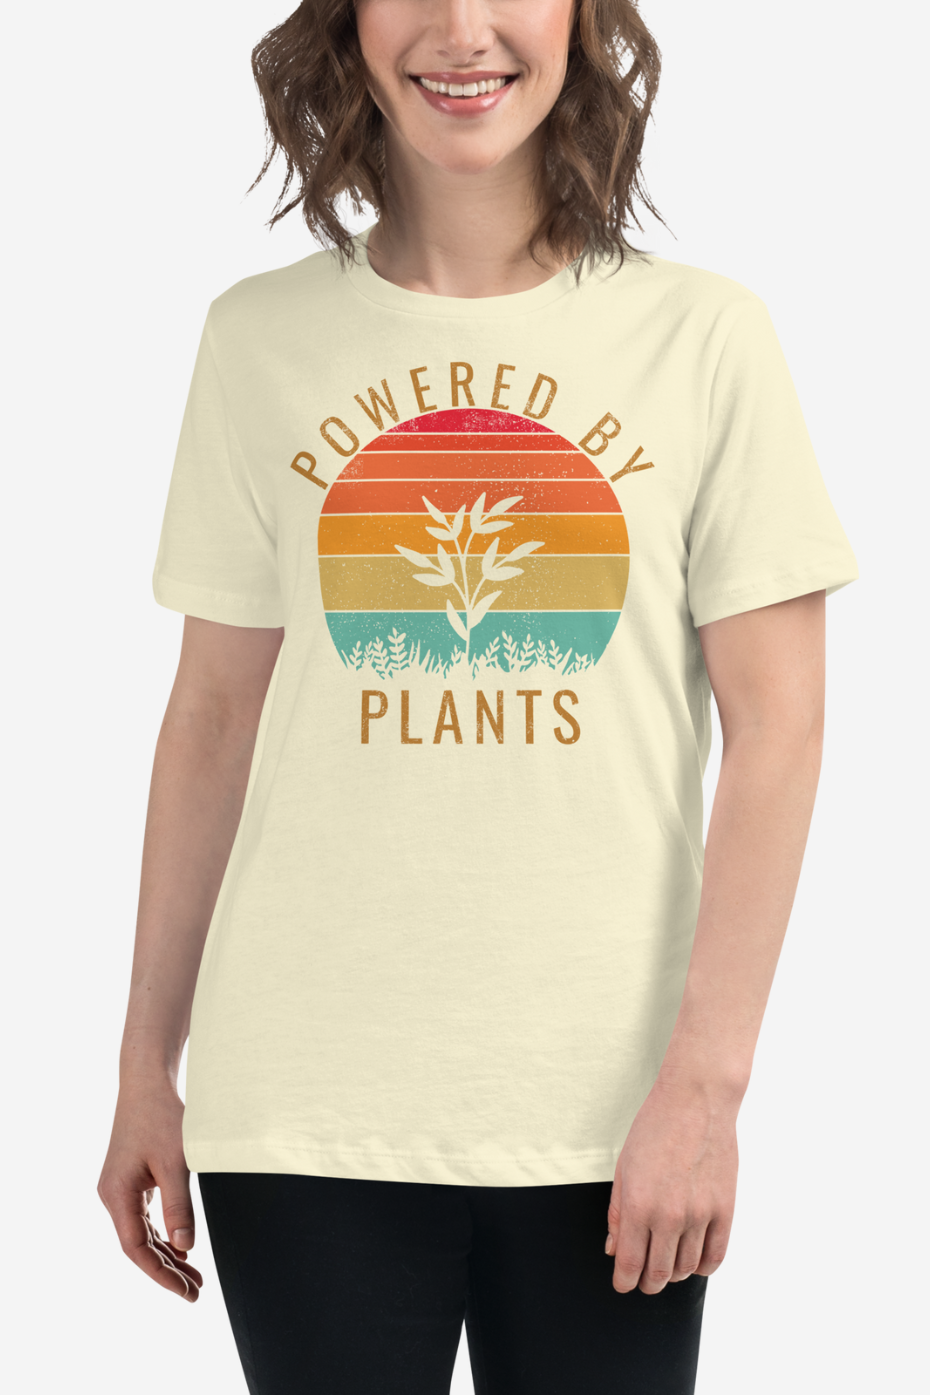 Powered by Plants Women's Relaxed T-Shirt